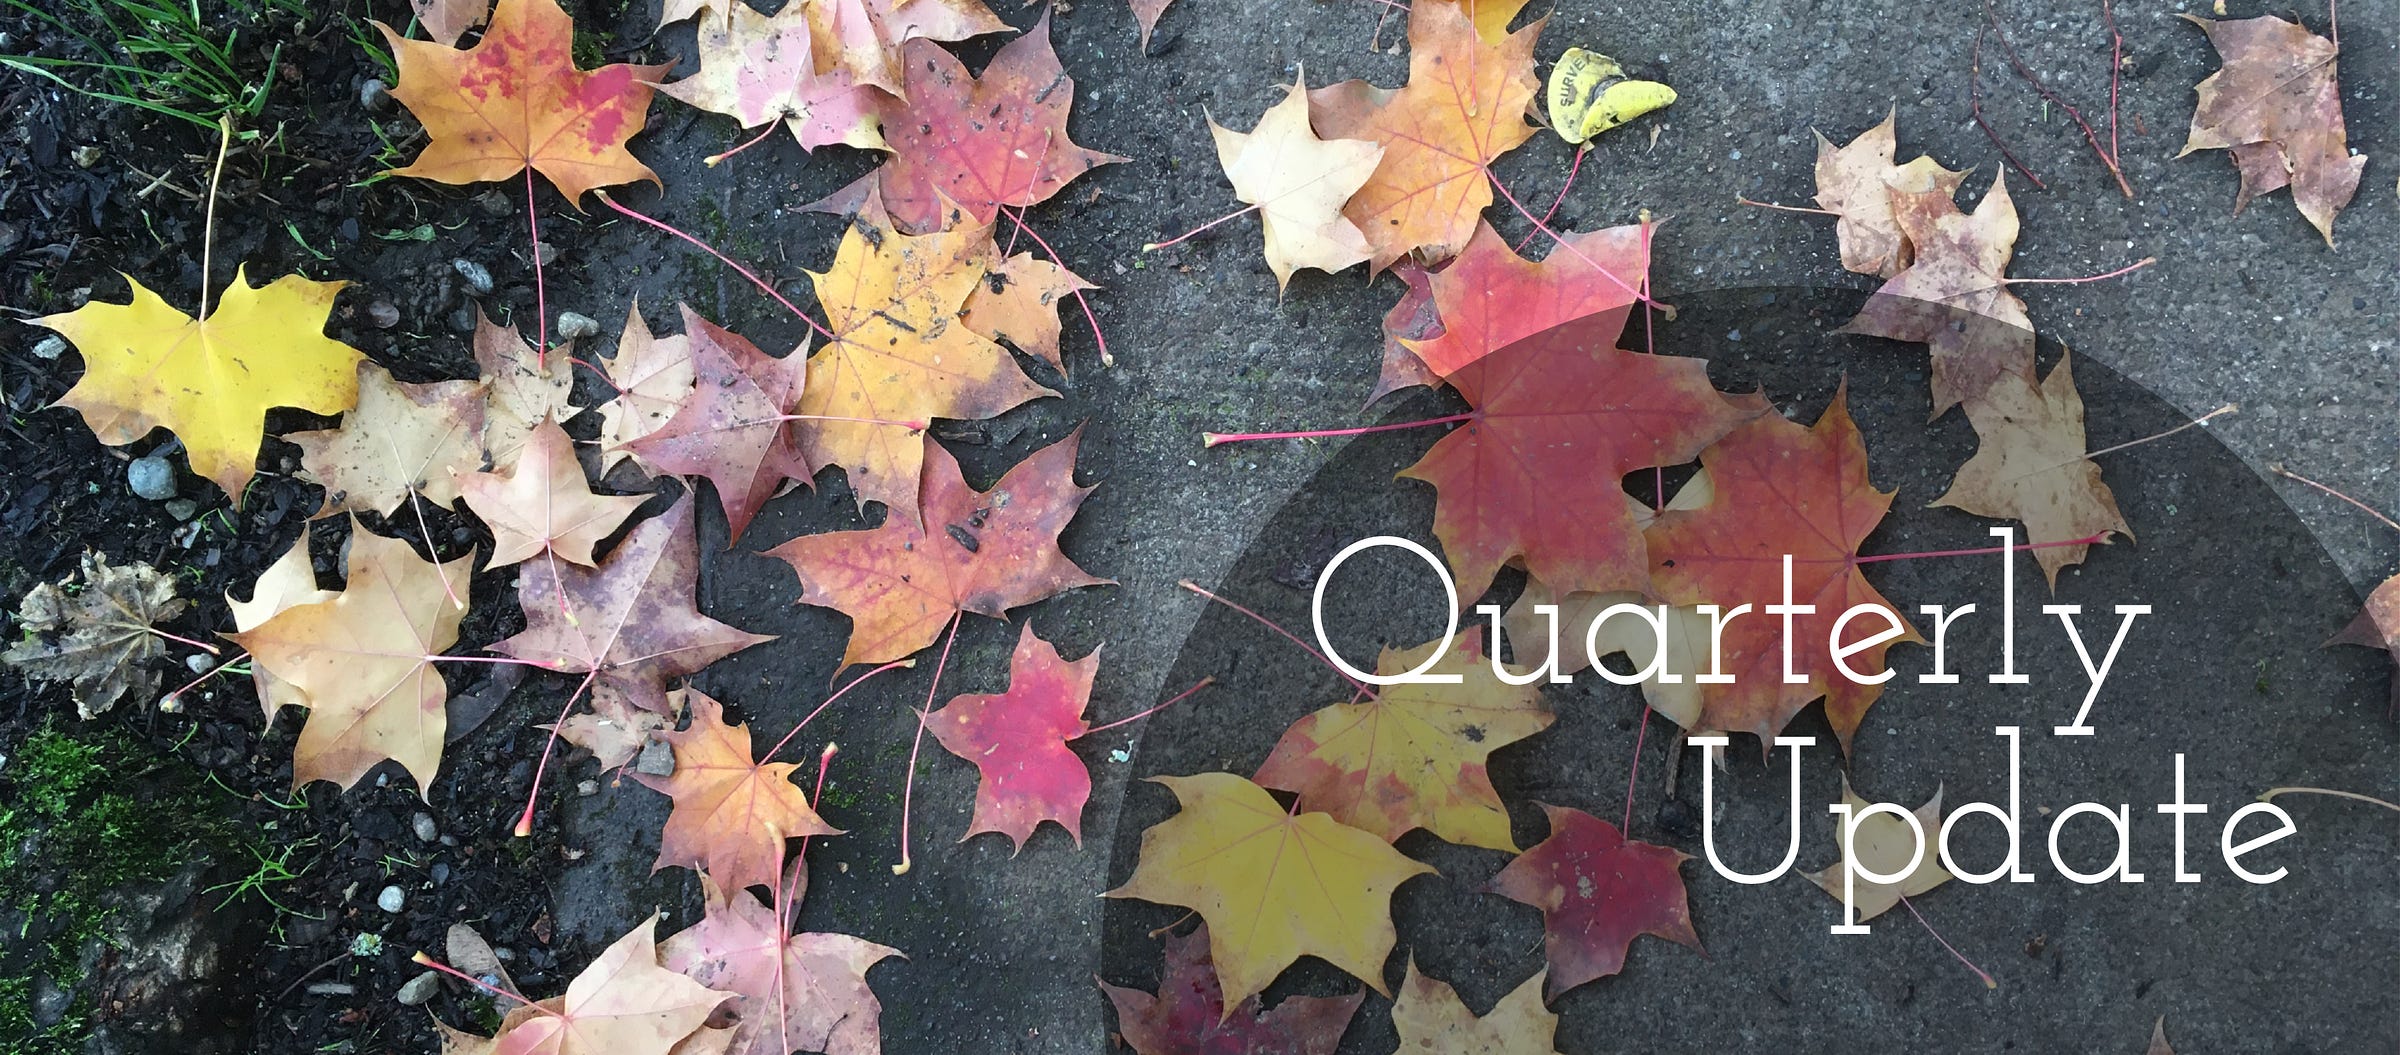 Photograph of fallen maple leaves on grass and concrete. The leaves are a mix of colours: Brown, yellow, red, orange. In the lower right corner of the image is text that reads: Quarterly Update